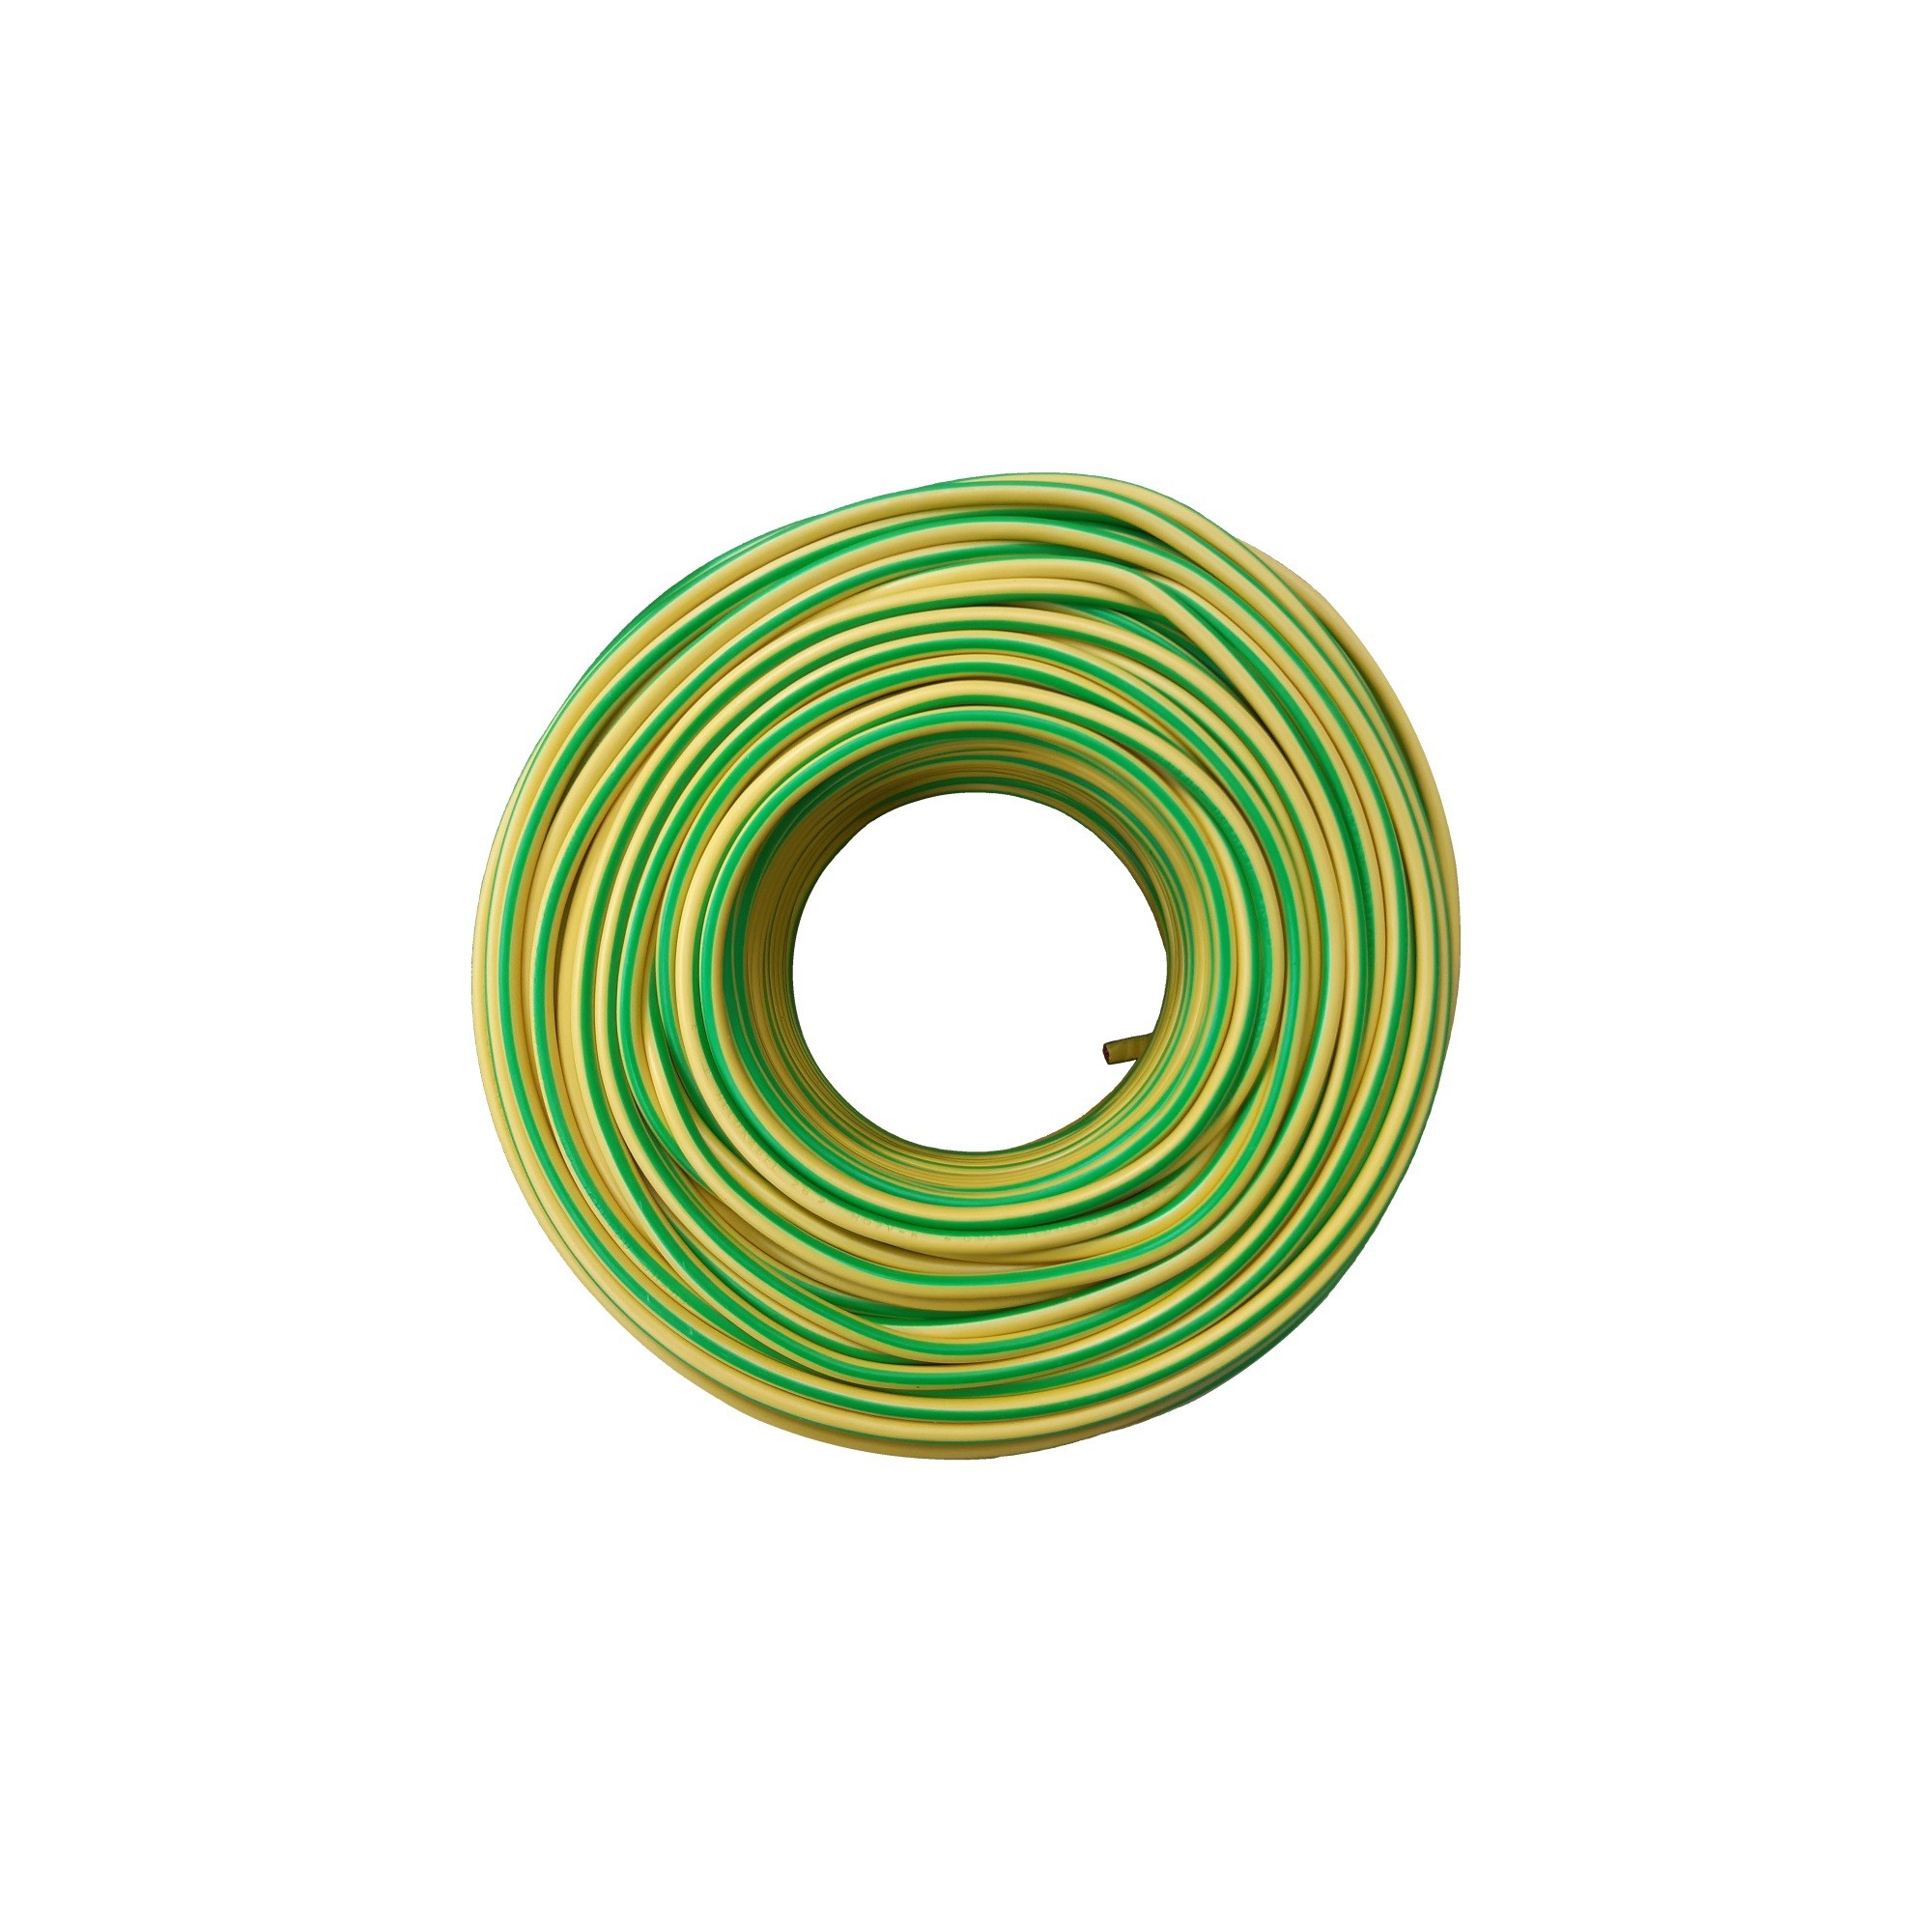 UV Yellow-green cable lgy 1x6 mm2 100 m